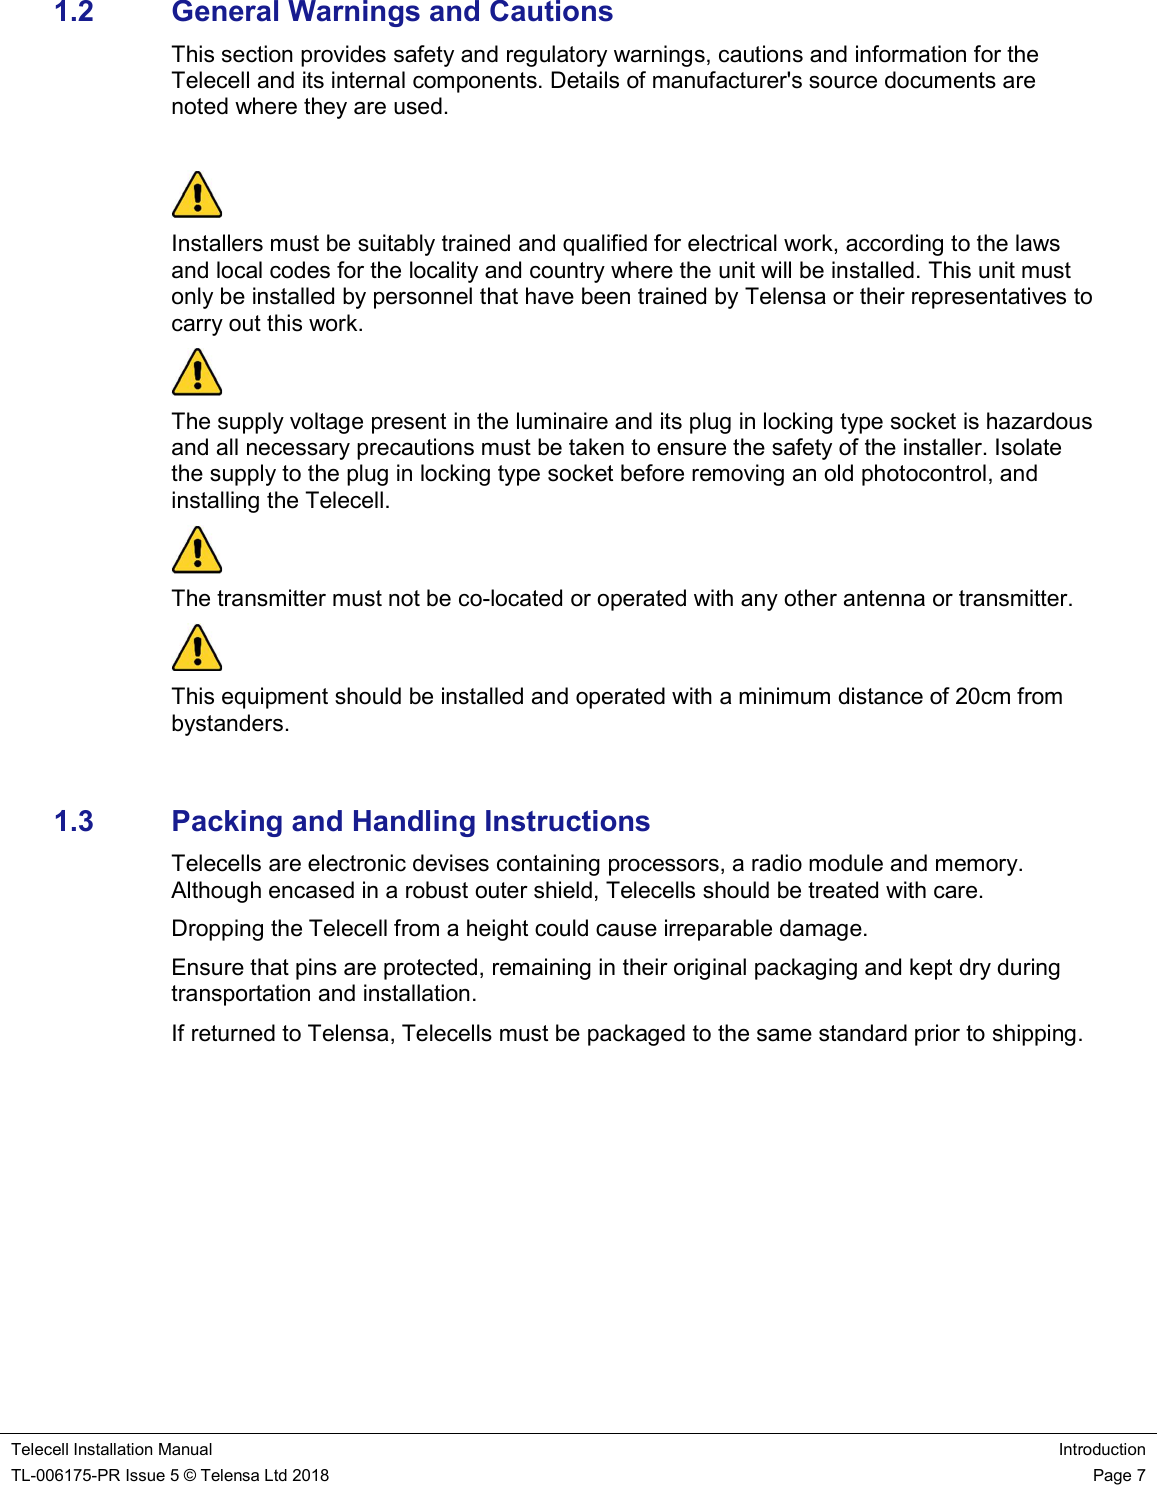    Telecell Installation Manual Introduction TL-006175-PR Issue 5 © Telensa Ltd 2018    Page 7  1.2  General Warnings and Cautions This section provides safety and regulatory warnings, cautions and information for the Telecell and its internal components. Details of manufacturer&apos;s source documents are noted where they are used.    Installers must be suitably trained and qualified for electrical work, according to the laws and local codes for the locality and country where the unit will be installed. This unit must only be installed by personnel that have been trained by Telensa or their representatives to carry out this work.  The supply voltage present in the luminaire and its plug in locking type socket is hazardous and all necessary precautions must be taken to ensure the safety of the installer. Isolate the supply to the plug in locking type socket before removing an old photocontrol, and installing the Telecell.  The transmitter must not be co-located or operated with any other antenna or transmitter.  This equipment should be installed and operated with a minimum distance of 20cm from bystanders.  1.3  Packing and Handling Instructions Telecells are electronic devises containing processors, a radio module and memory. Although encased in a robust outer shield, Telecells should be treated with care. Dropping the Telecell from a height could cause irreparable damage. Ensure that pins are protected, remaining in their original packaging and kept dry during transportation and installation.  If returned to Telensa, Telecells must be packaged to the same standard prior to shipping.   